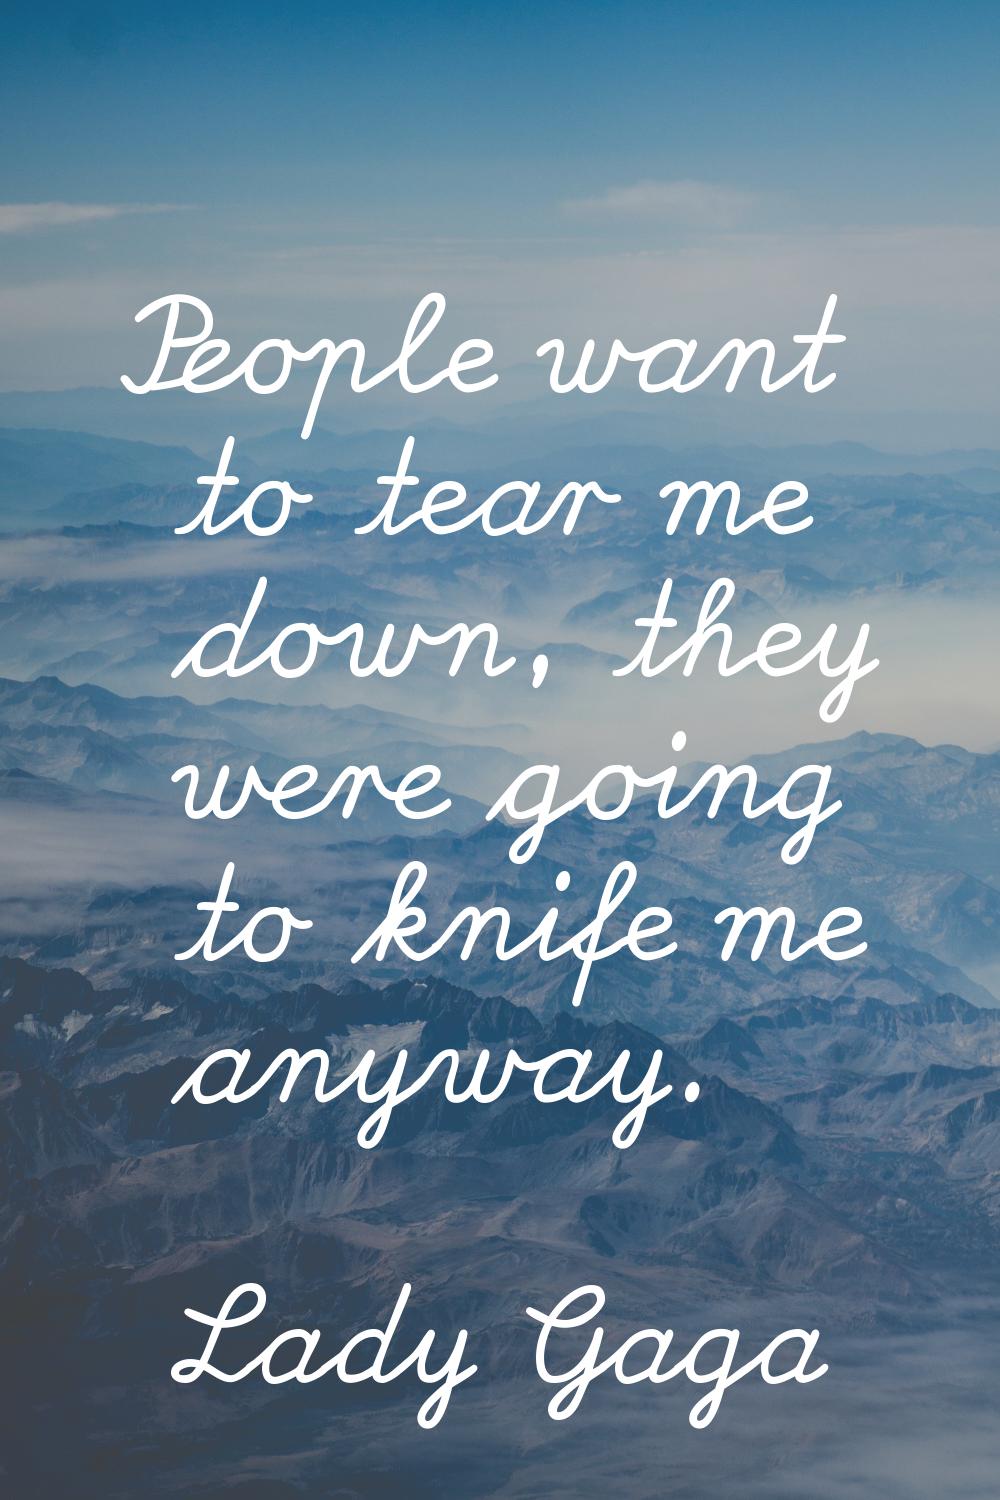 People want to tear me down, they were going to knife me anyway.